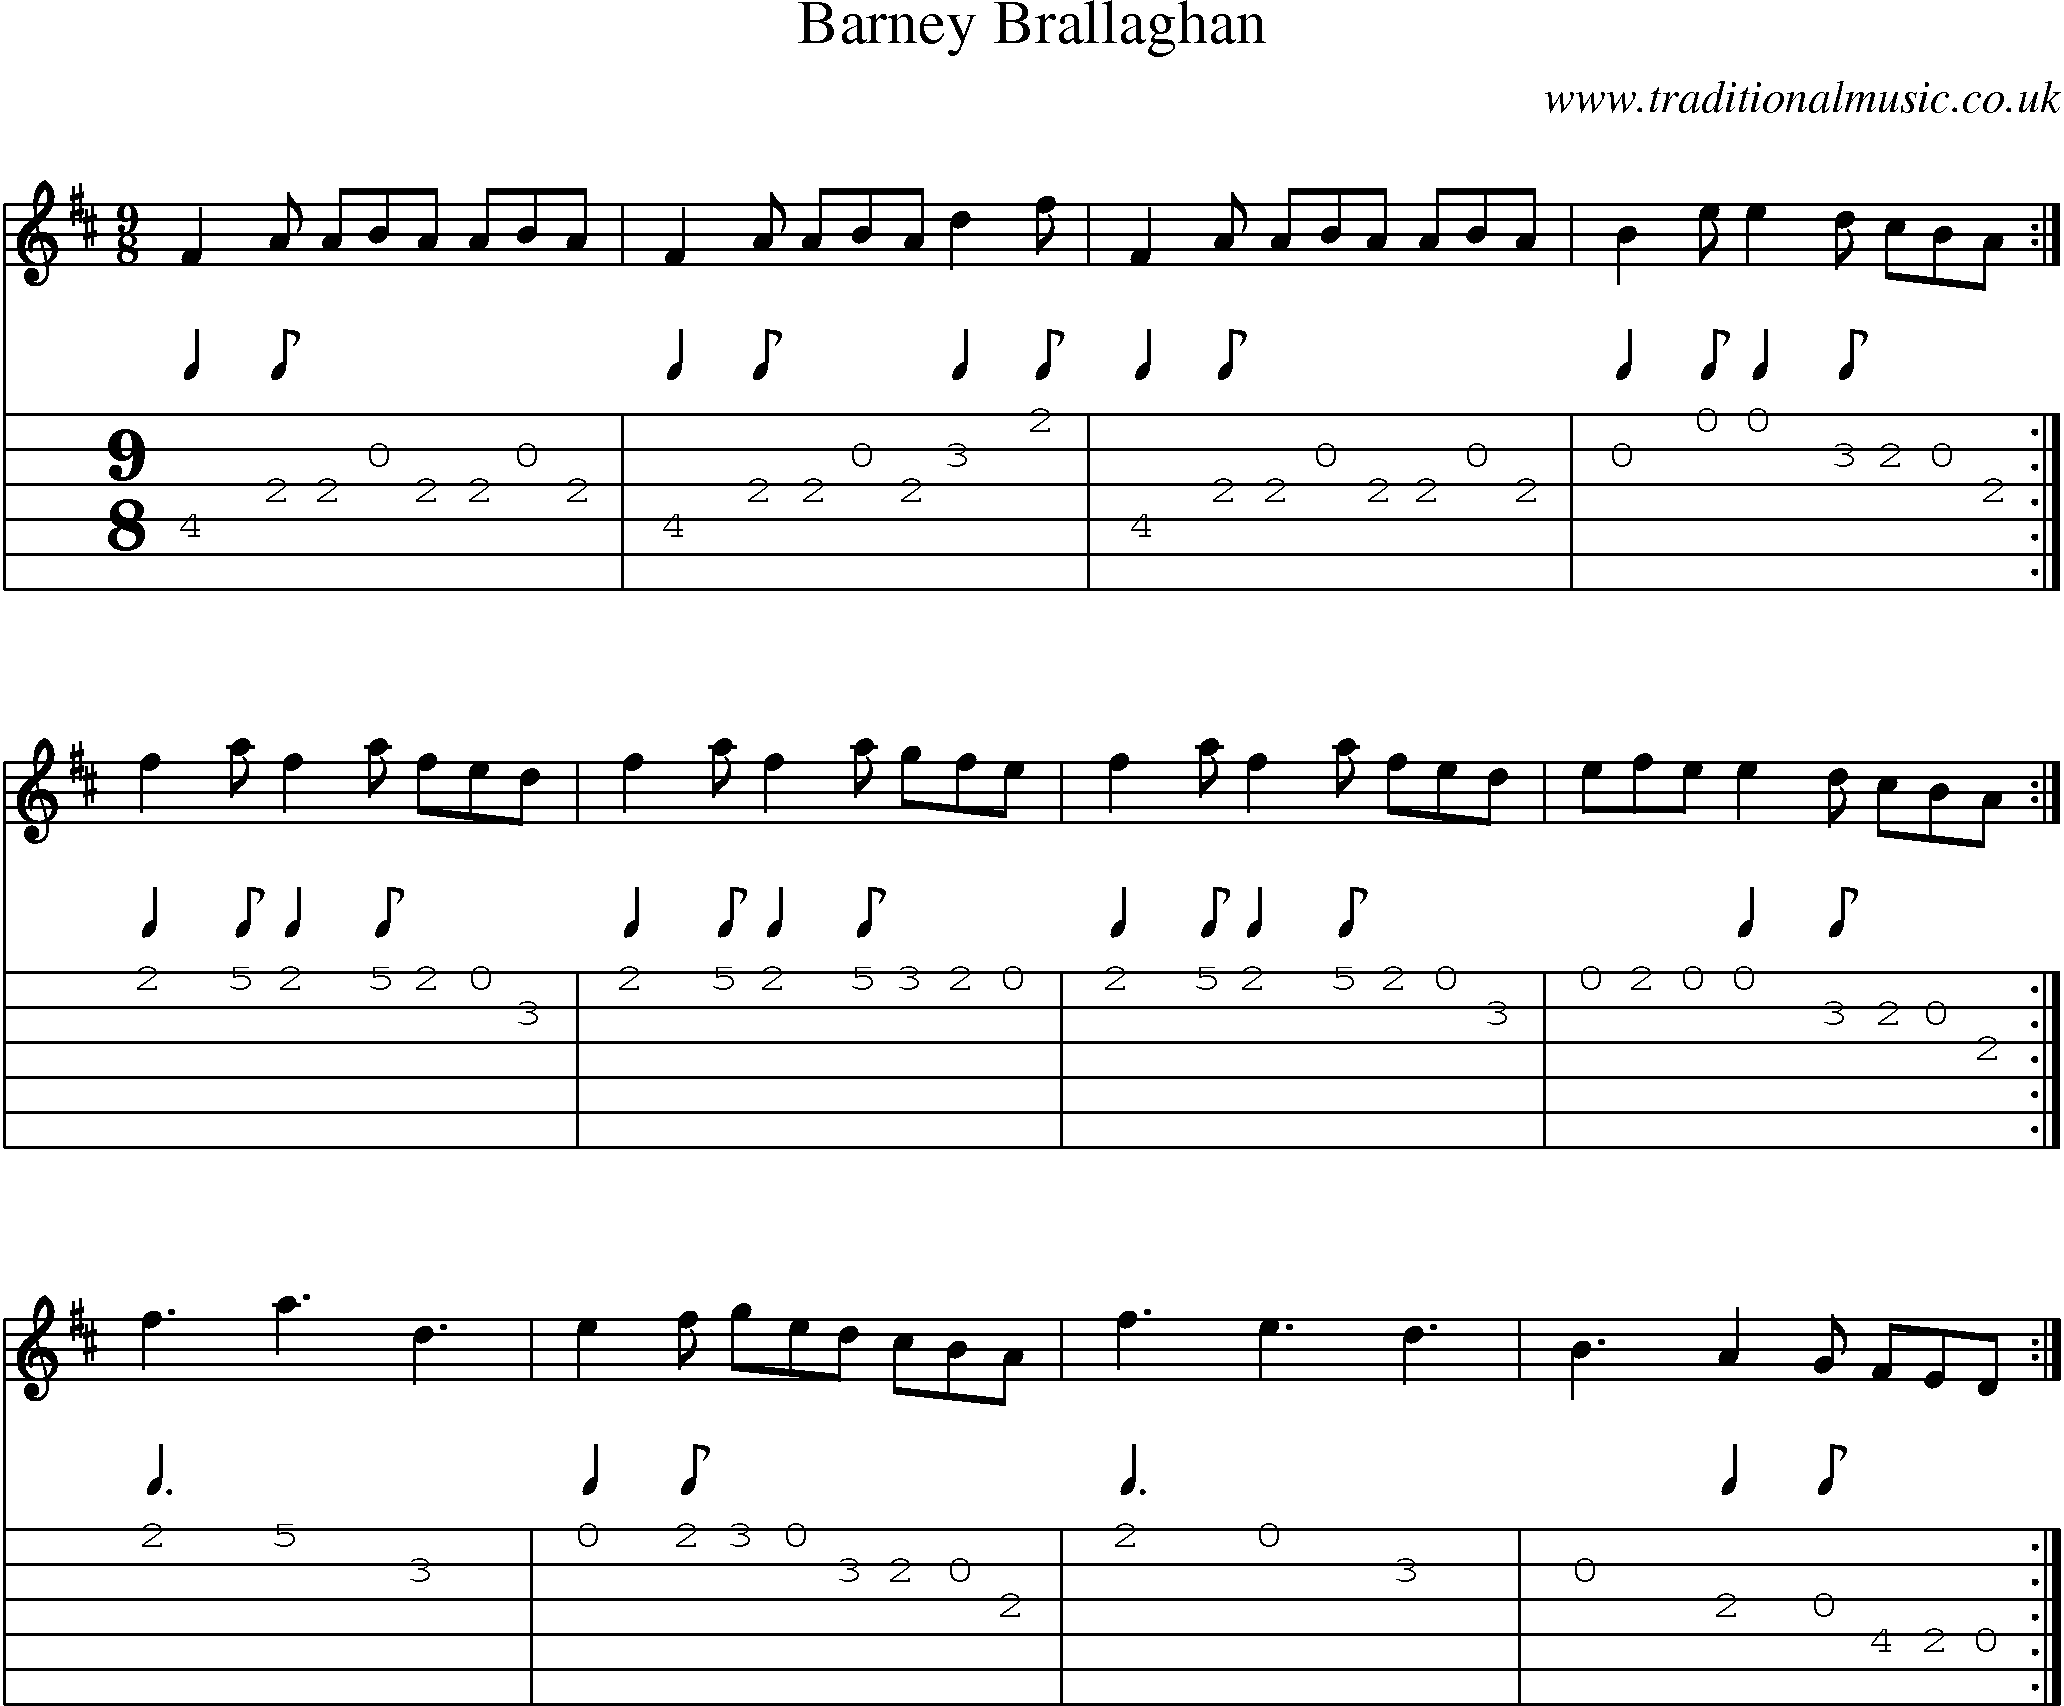 Music Score and Guitar Tabs for Barney Brallaghan